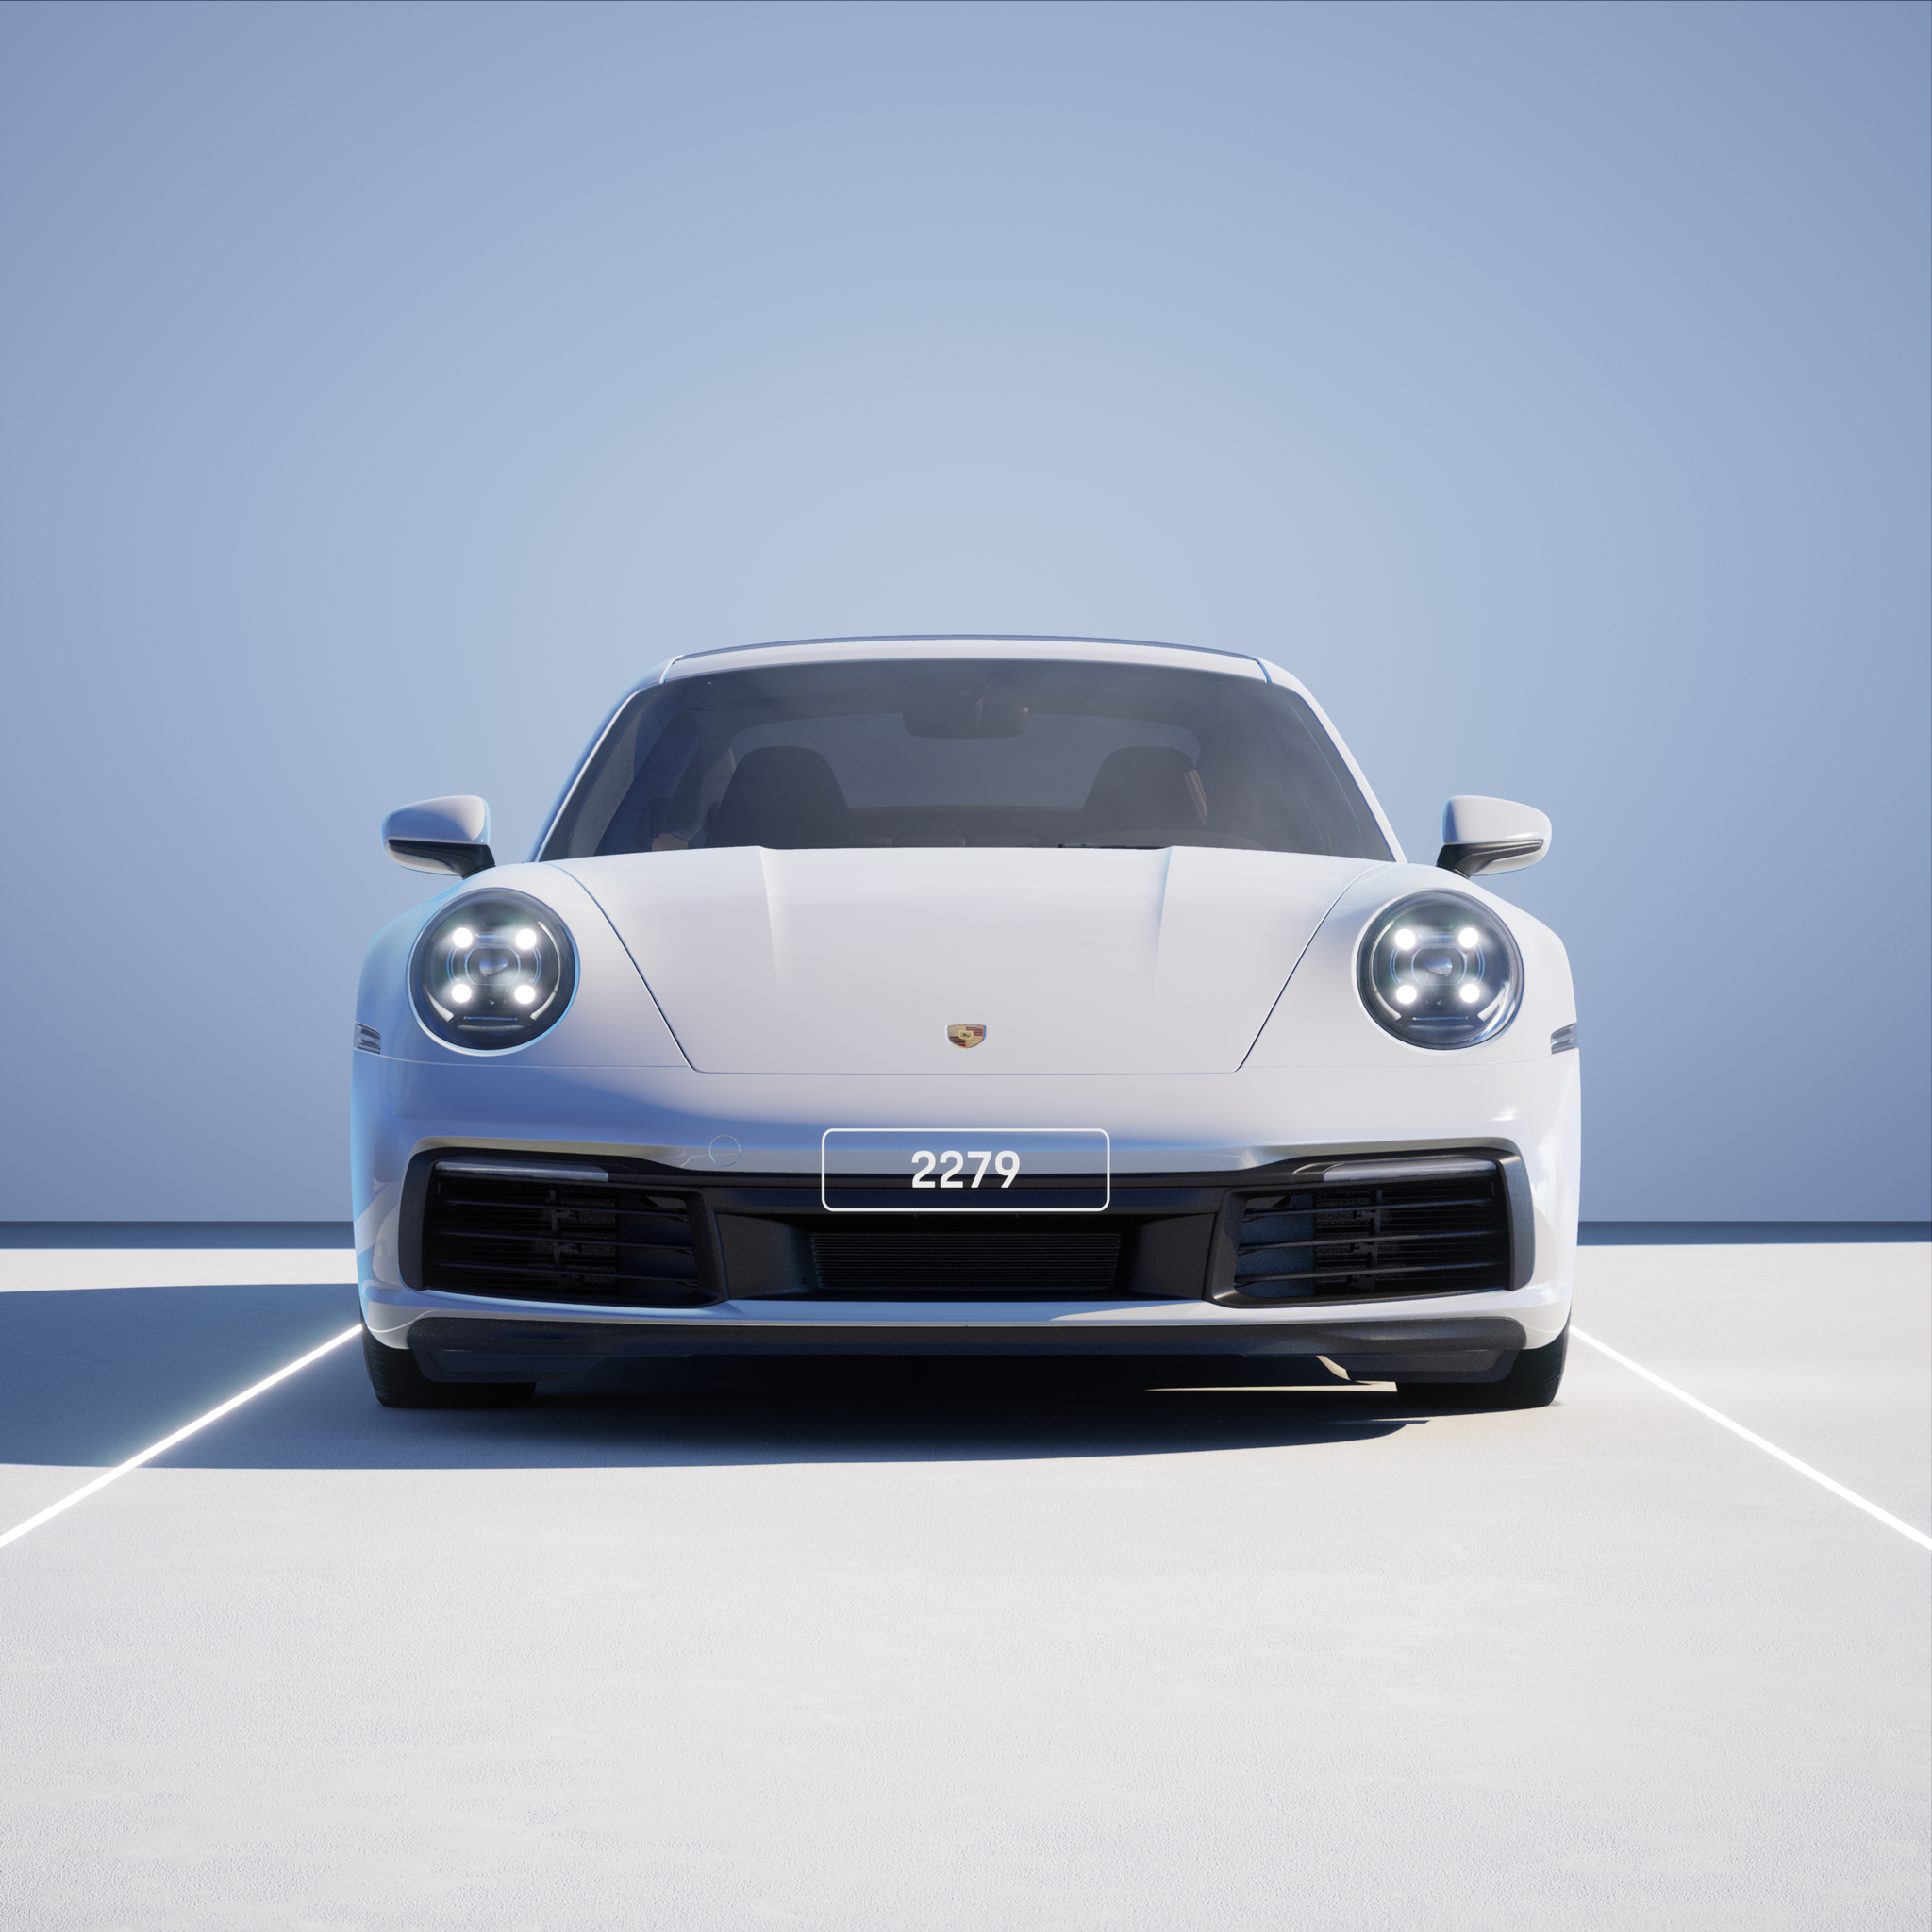 The PORSCHΞ 911 2279 image in phase